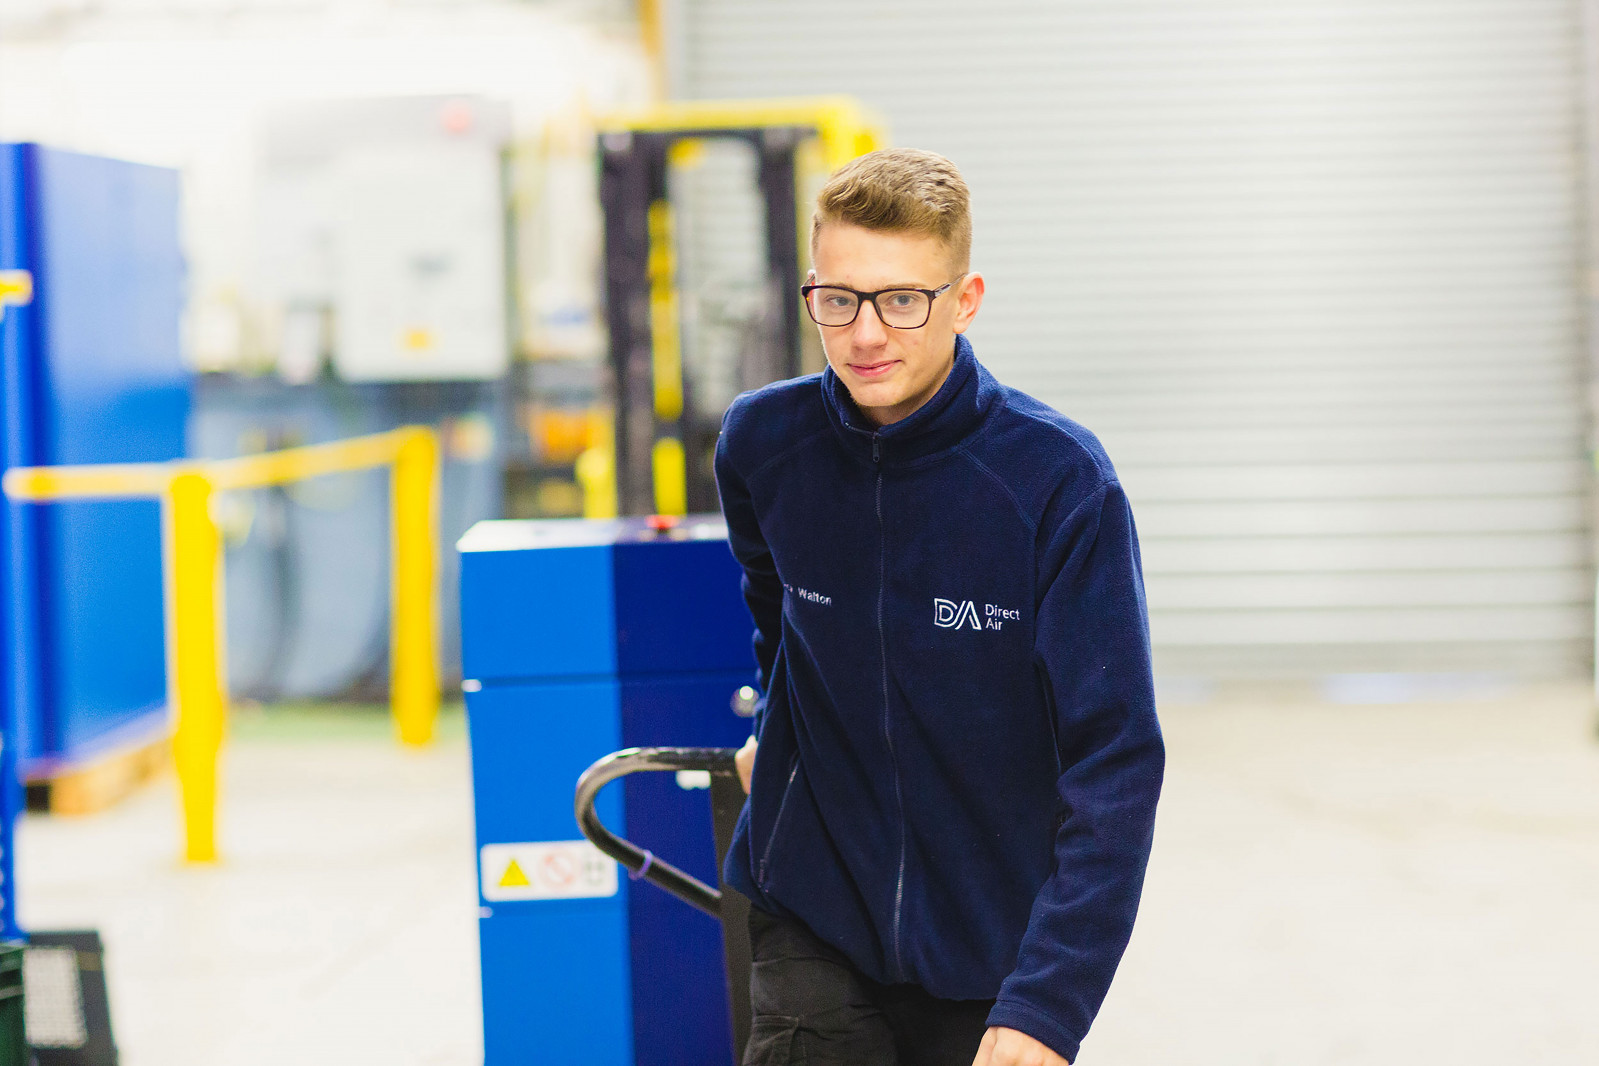 Benefits for both business and apprenticeships